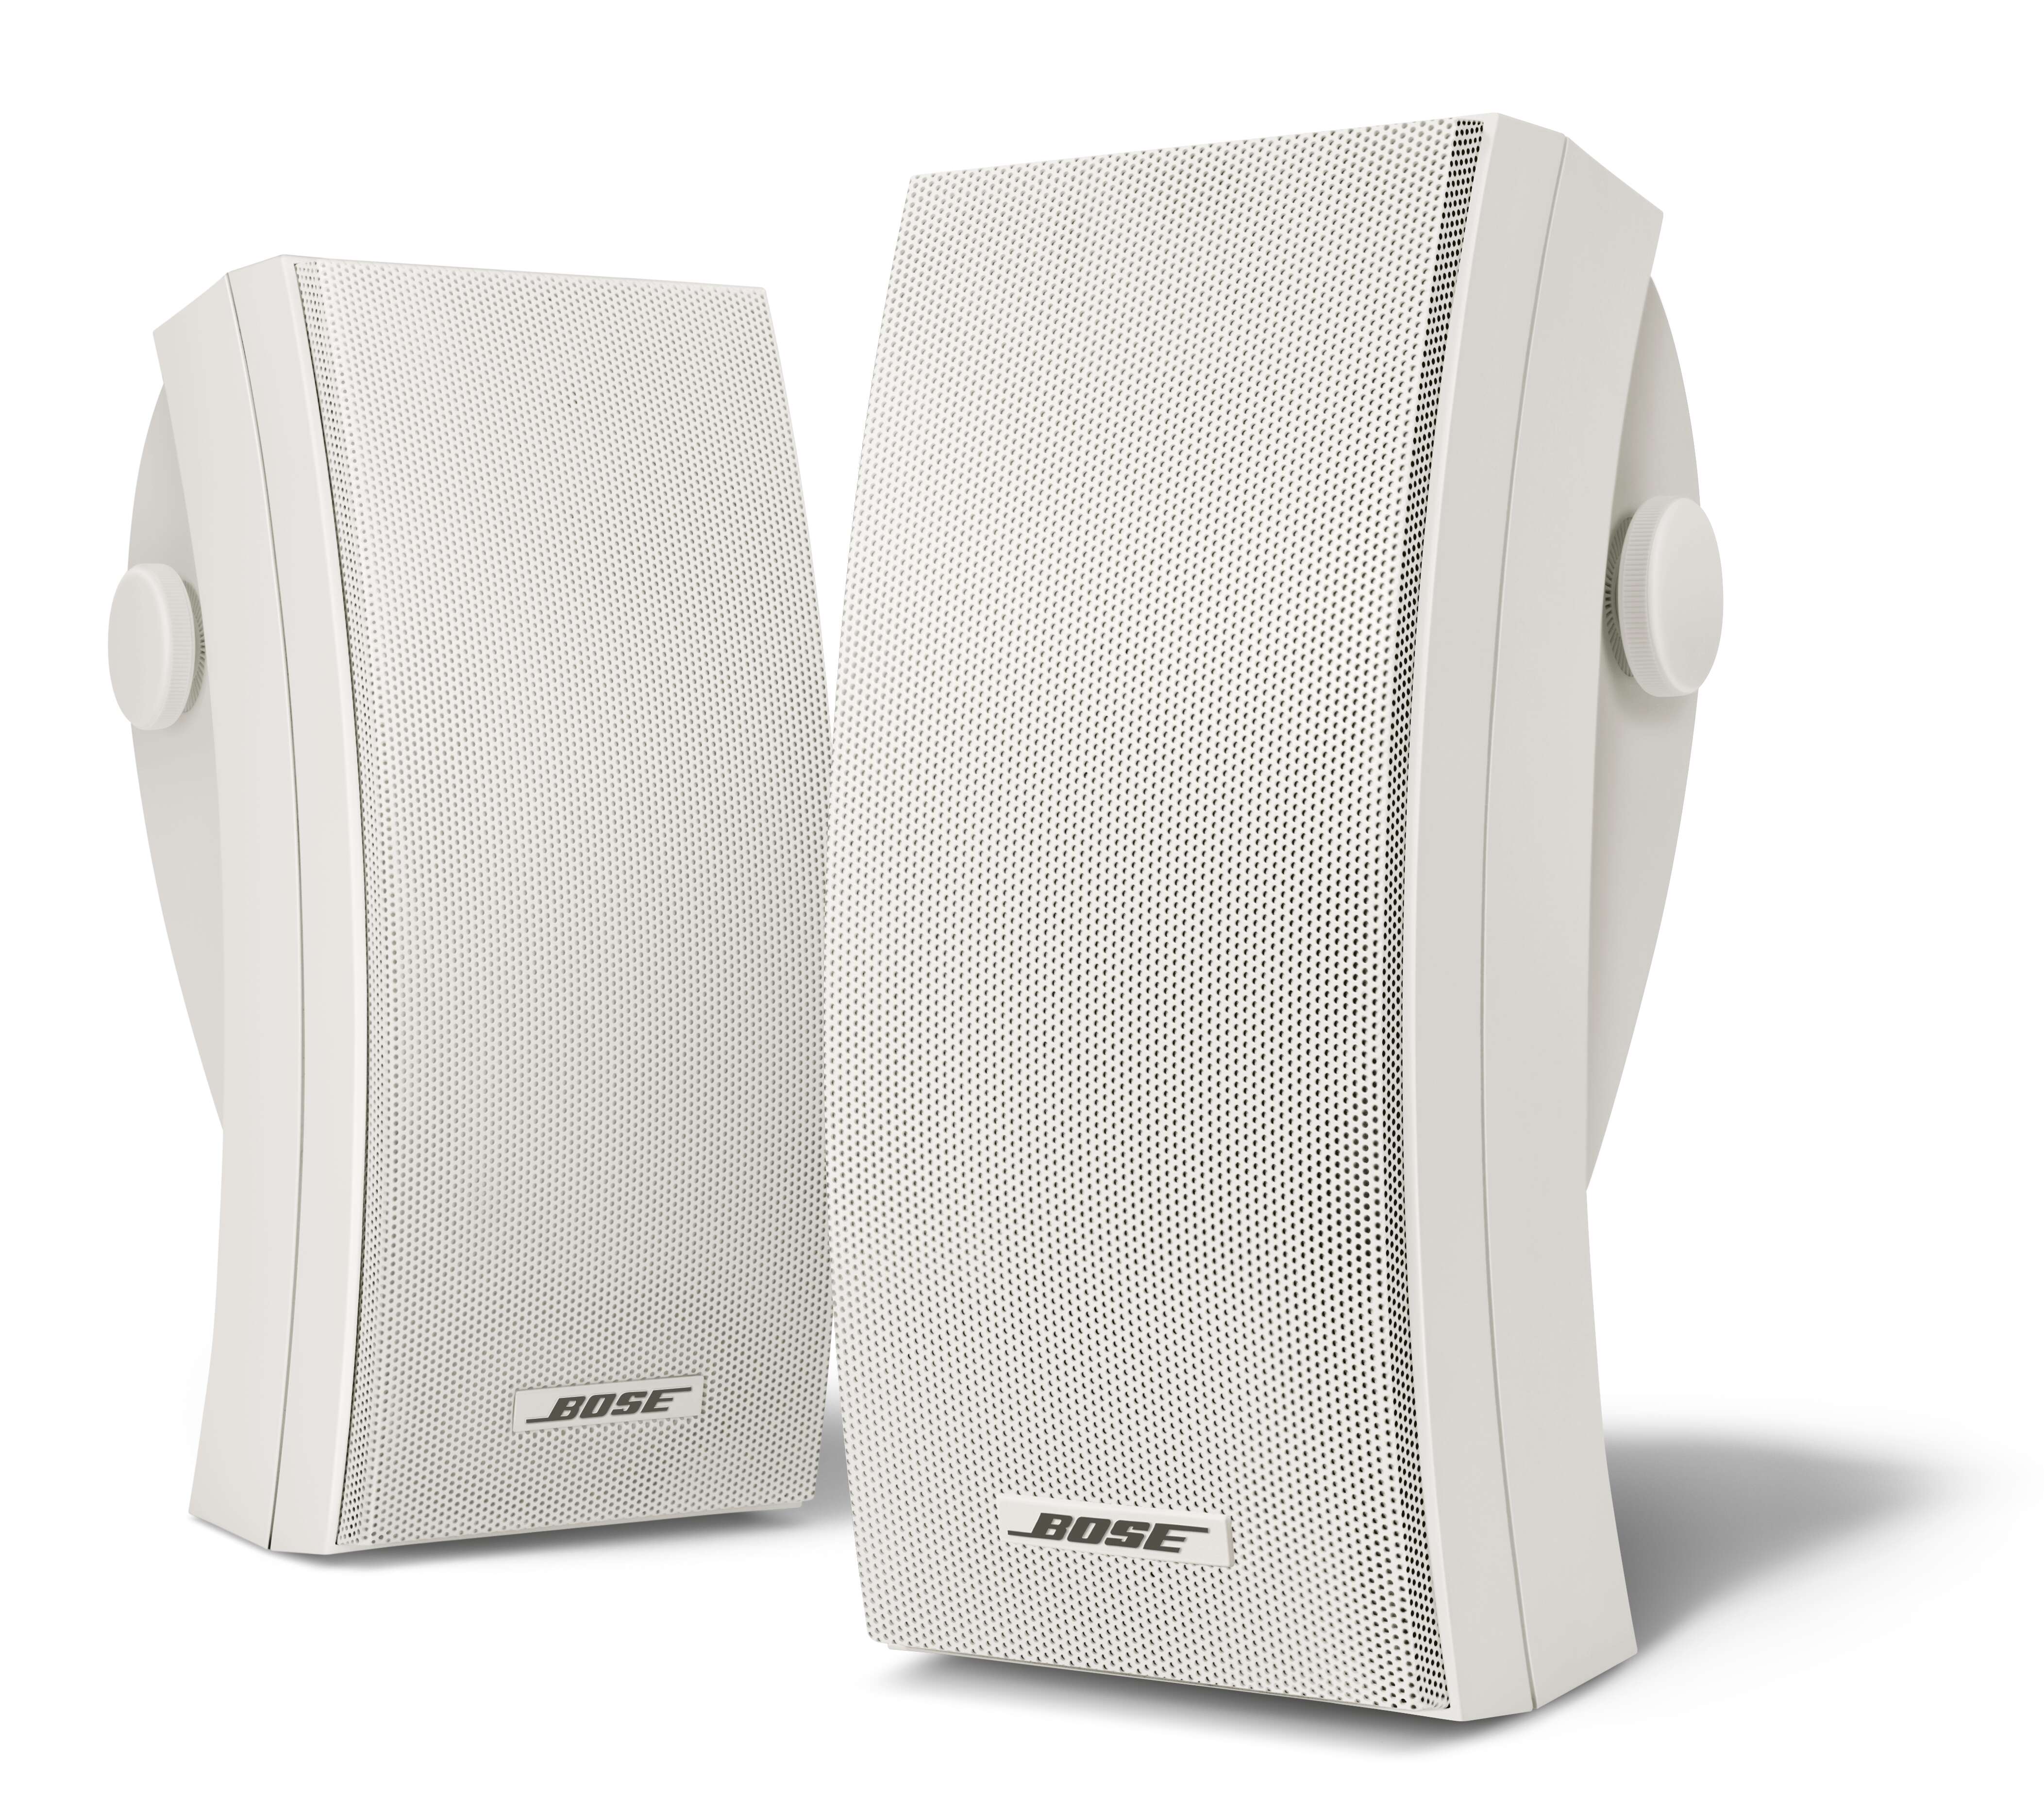 Bose 251 Weather-resistant Outdoor Speakers, White - image 1 of 2